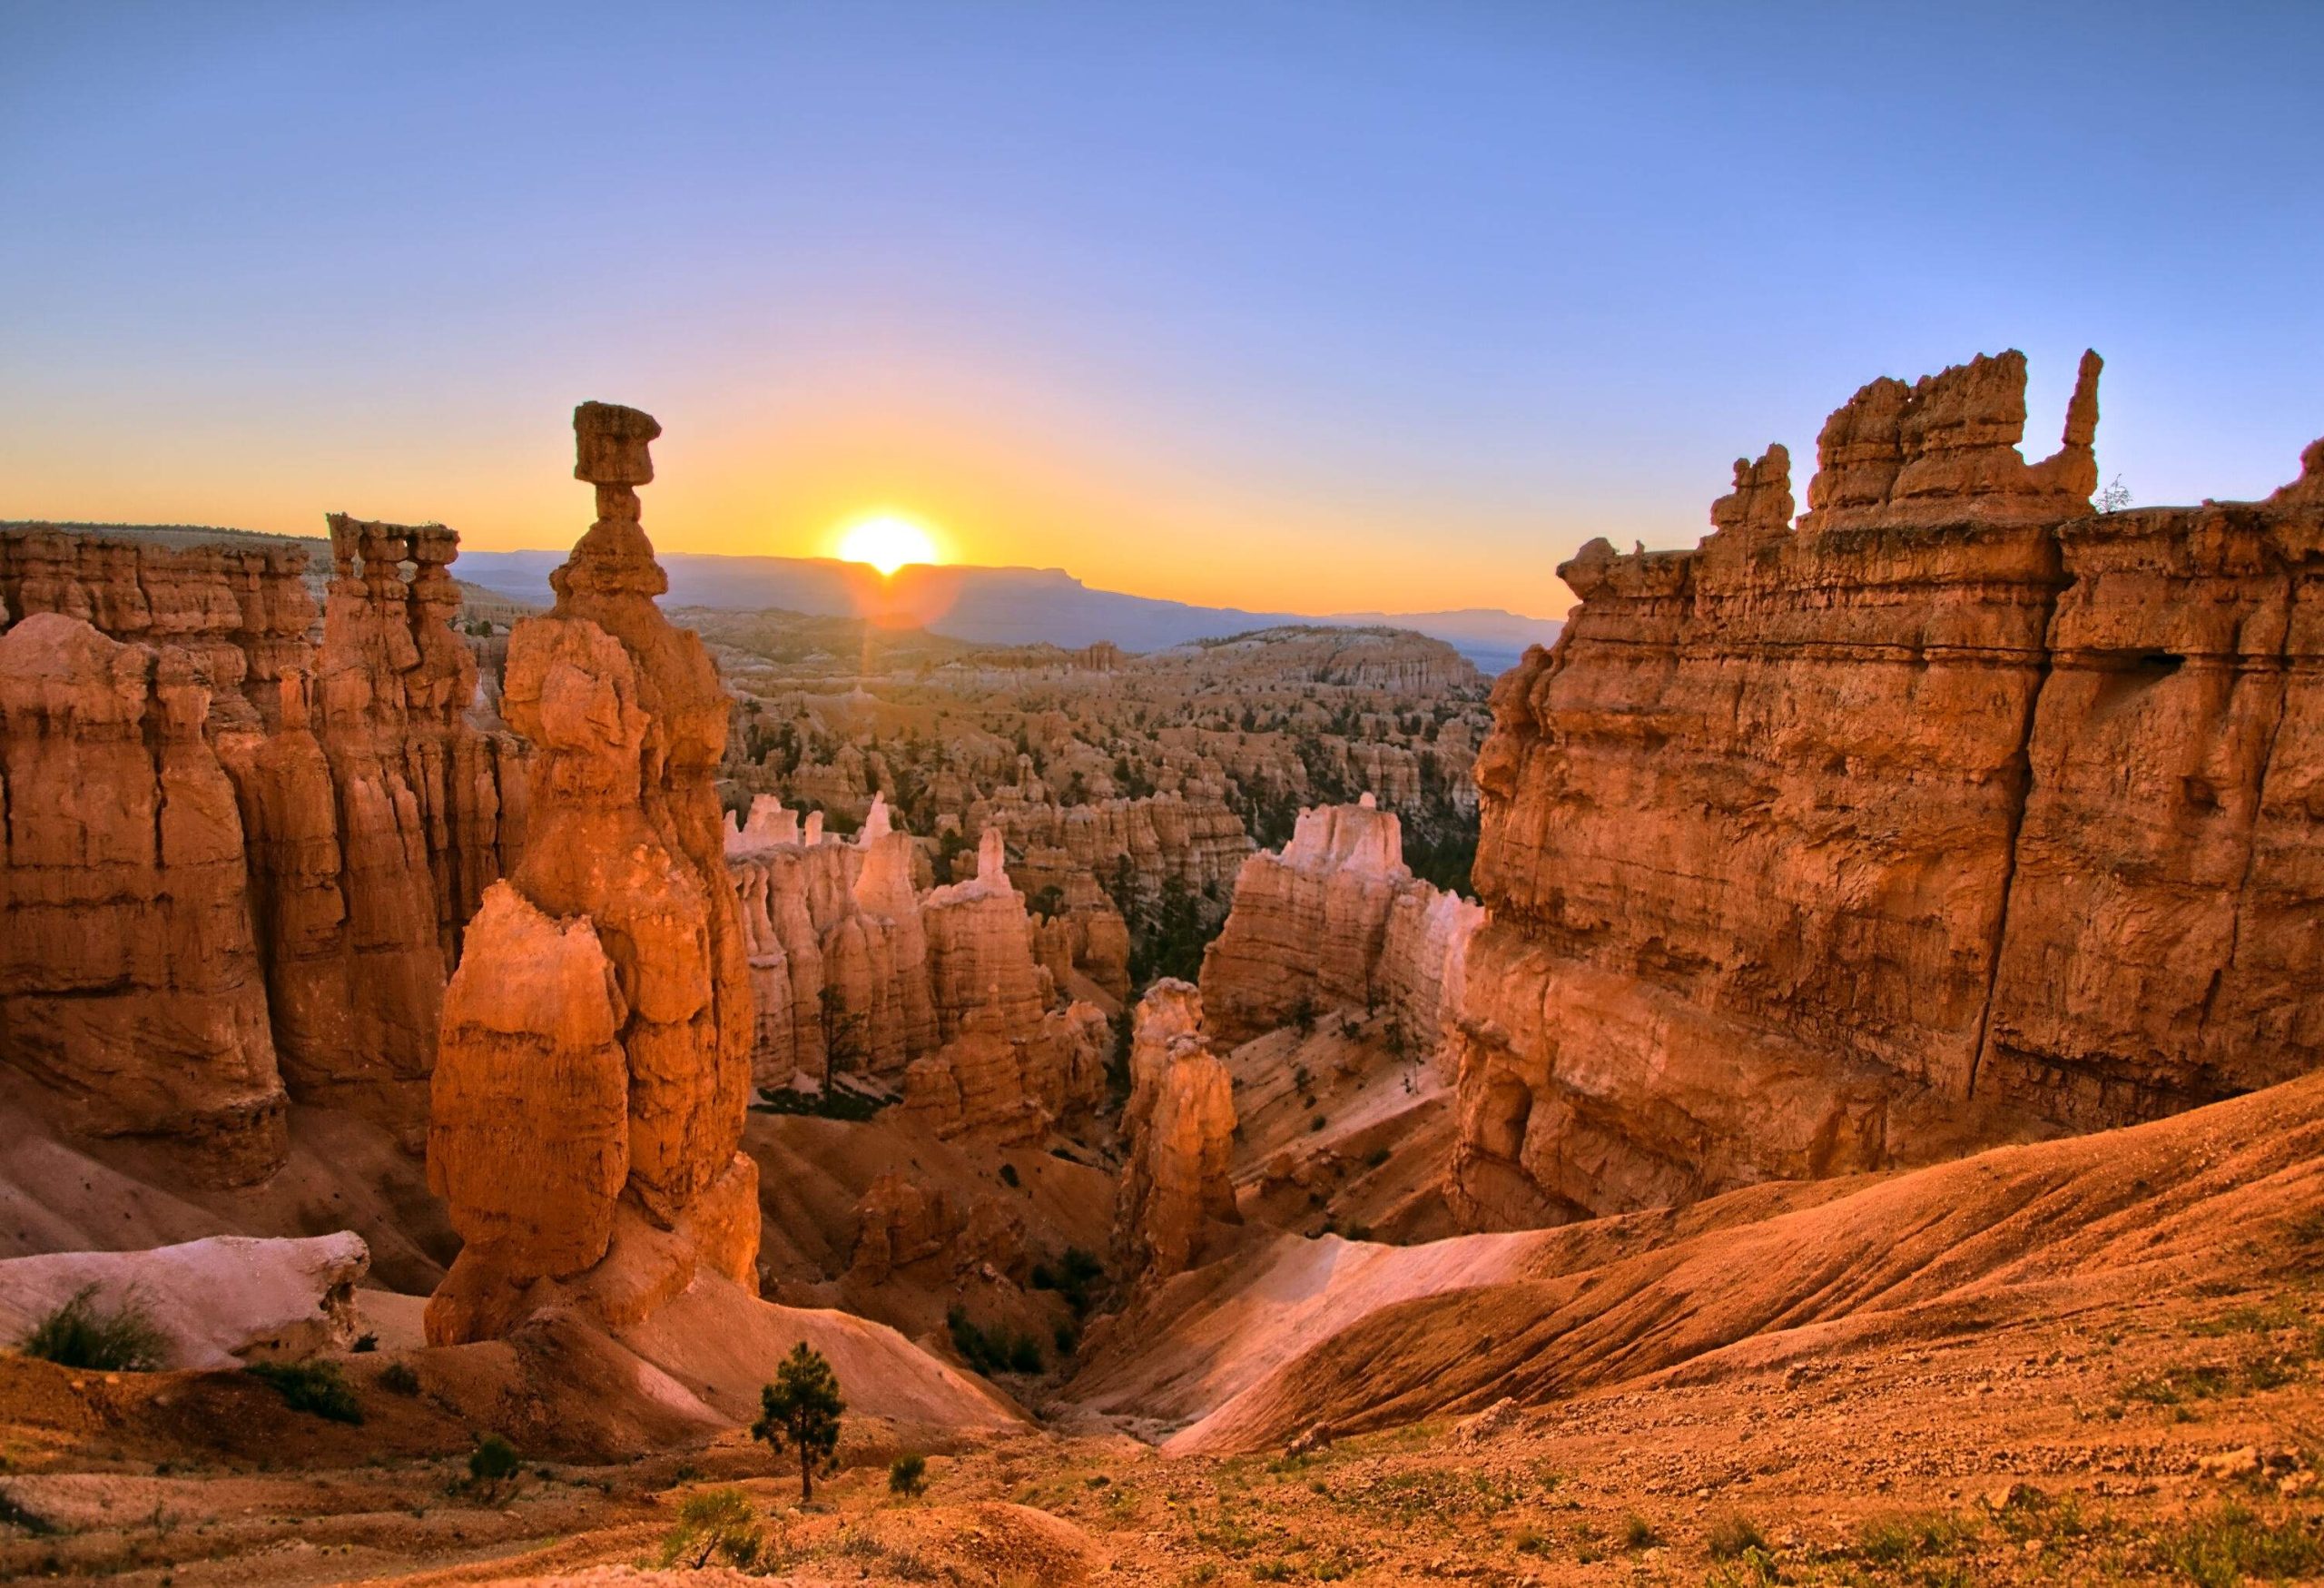 A scenic sunrise across a magnificent canyonland viewed from a hillside.